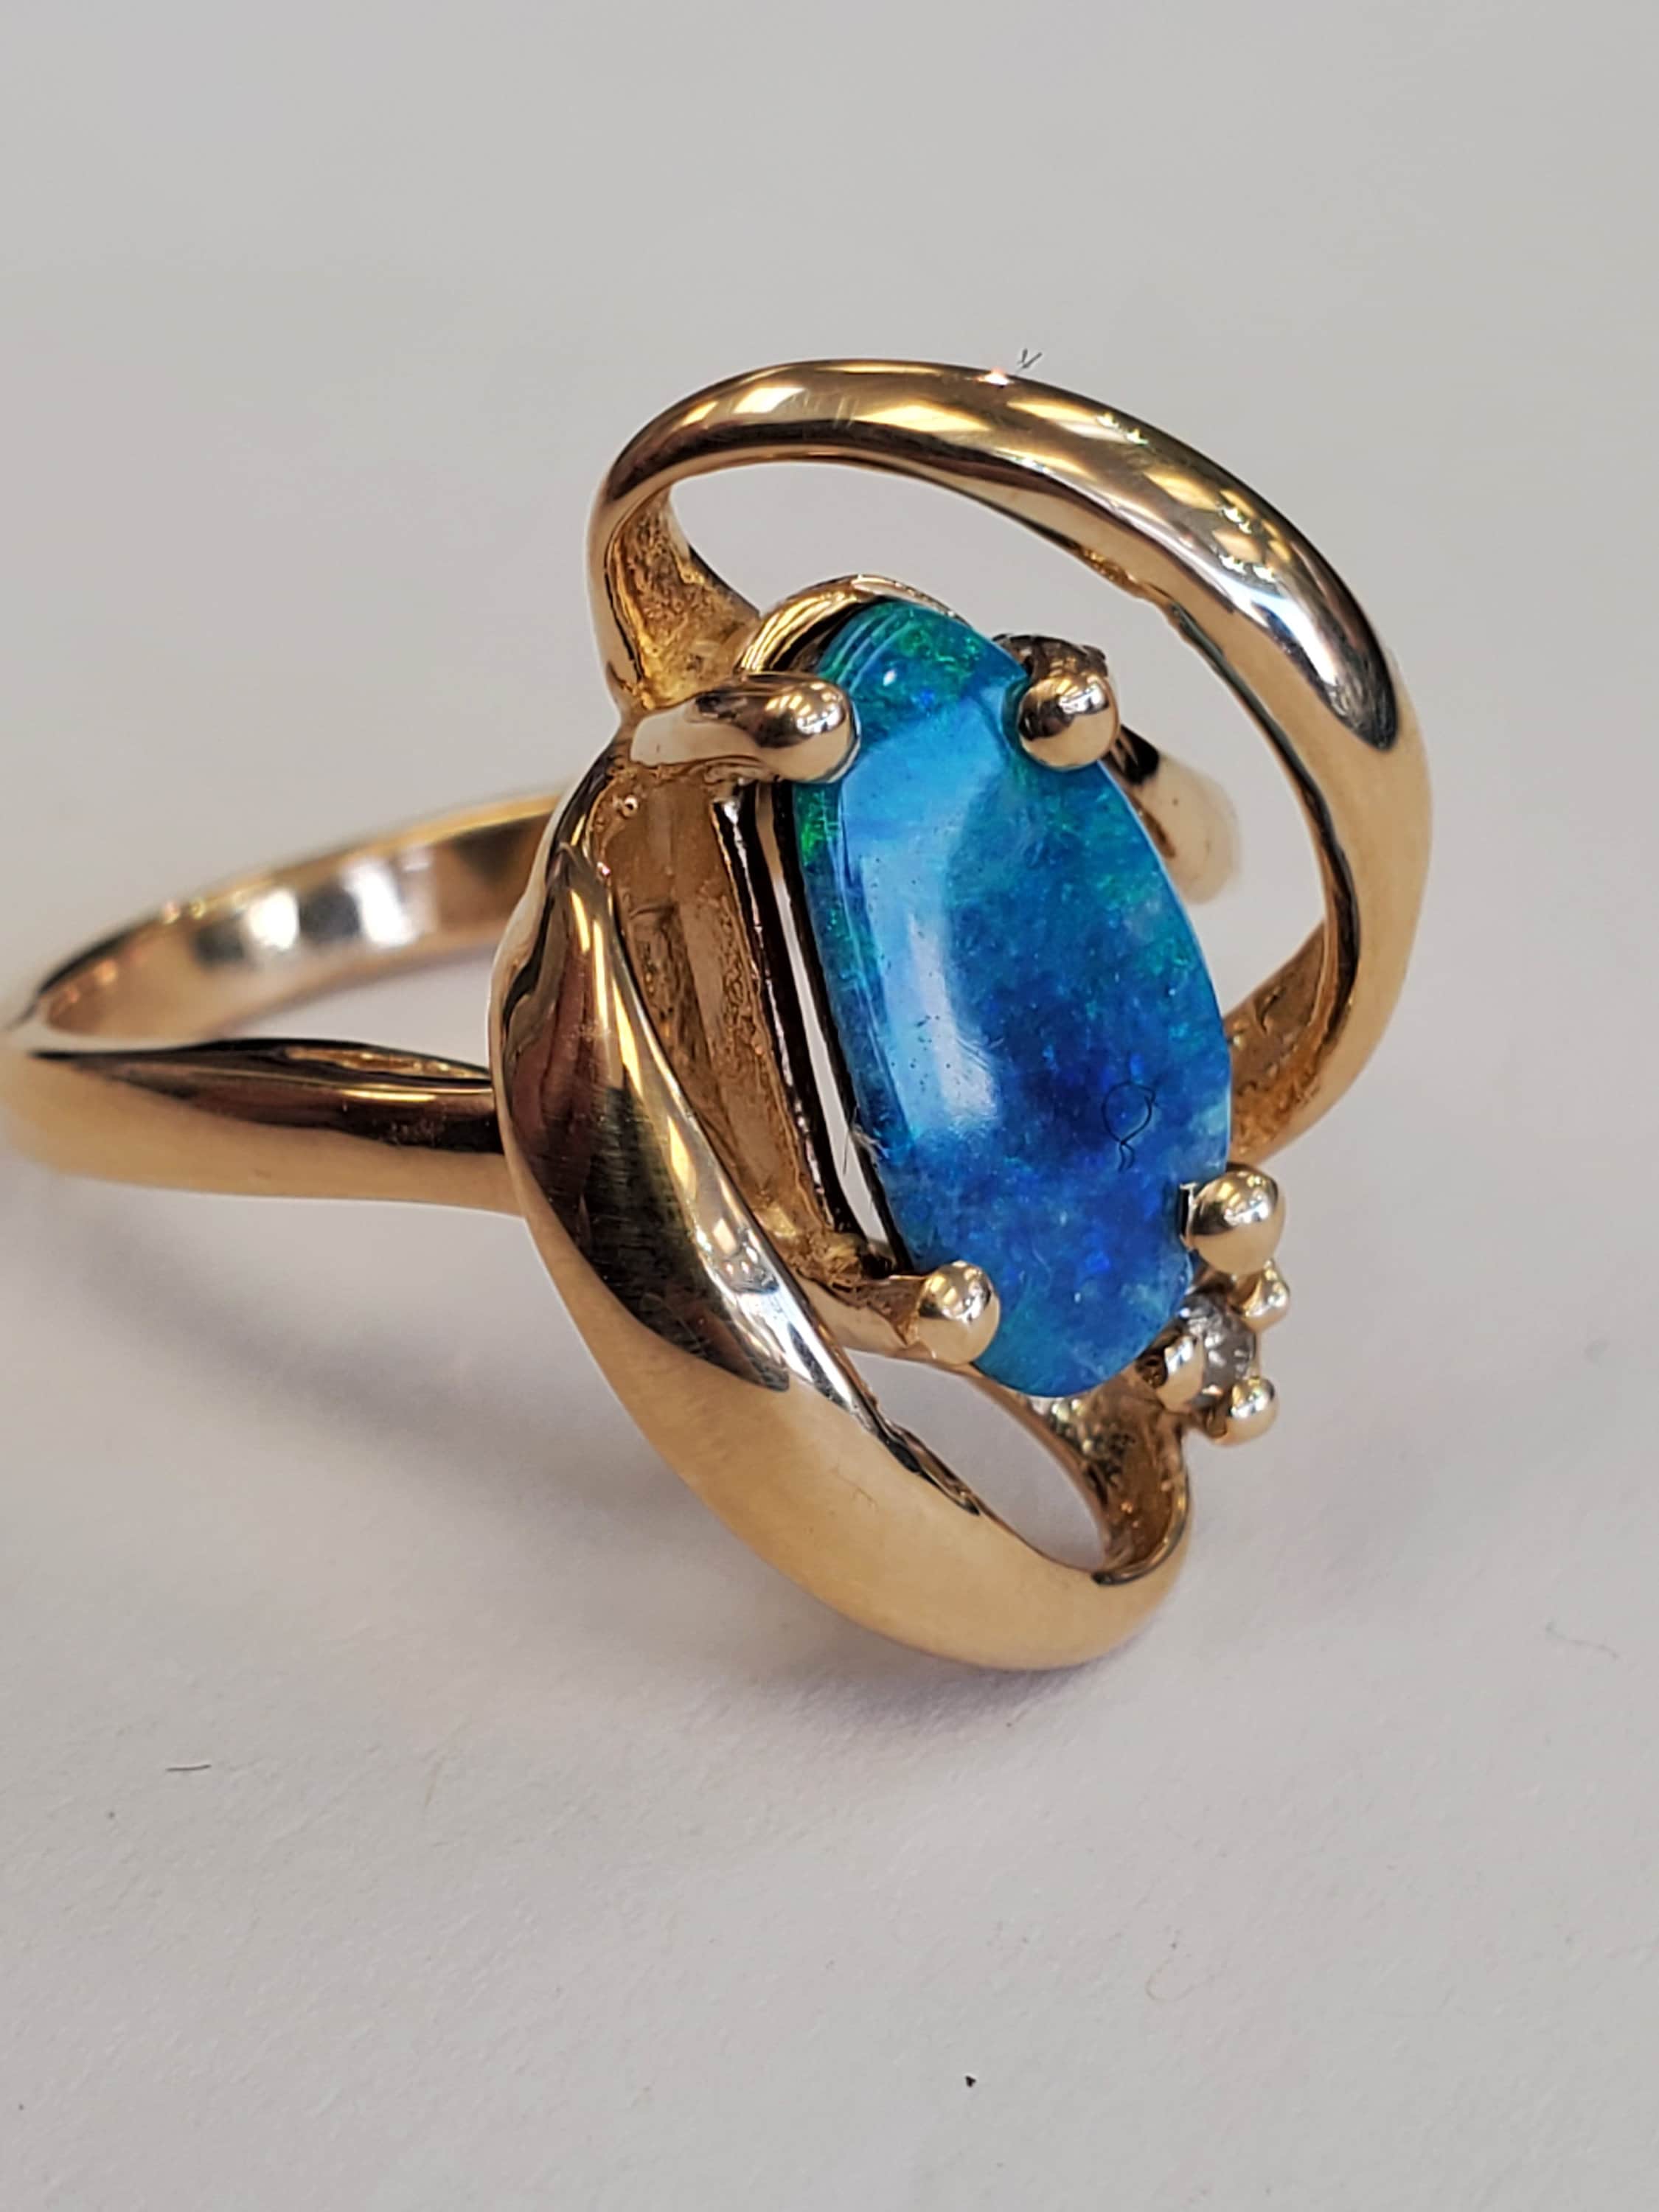 Product Image for Triplet opal and diamond swirl ring 14k yellow gold size 6.25